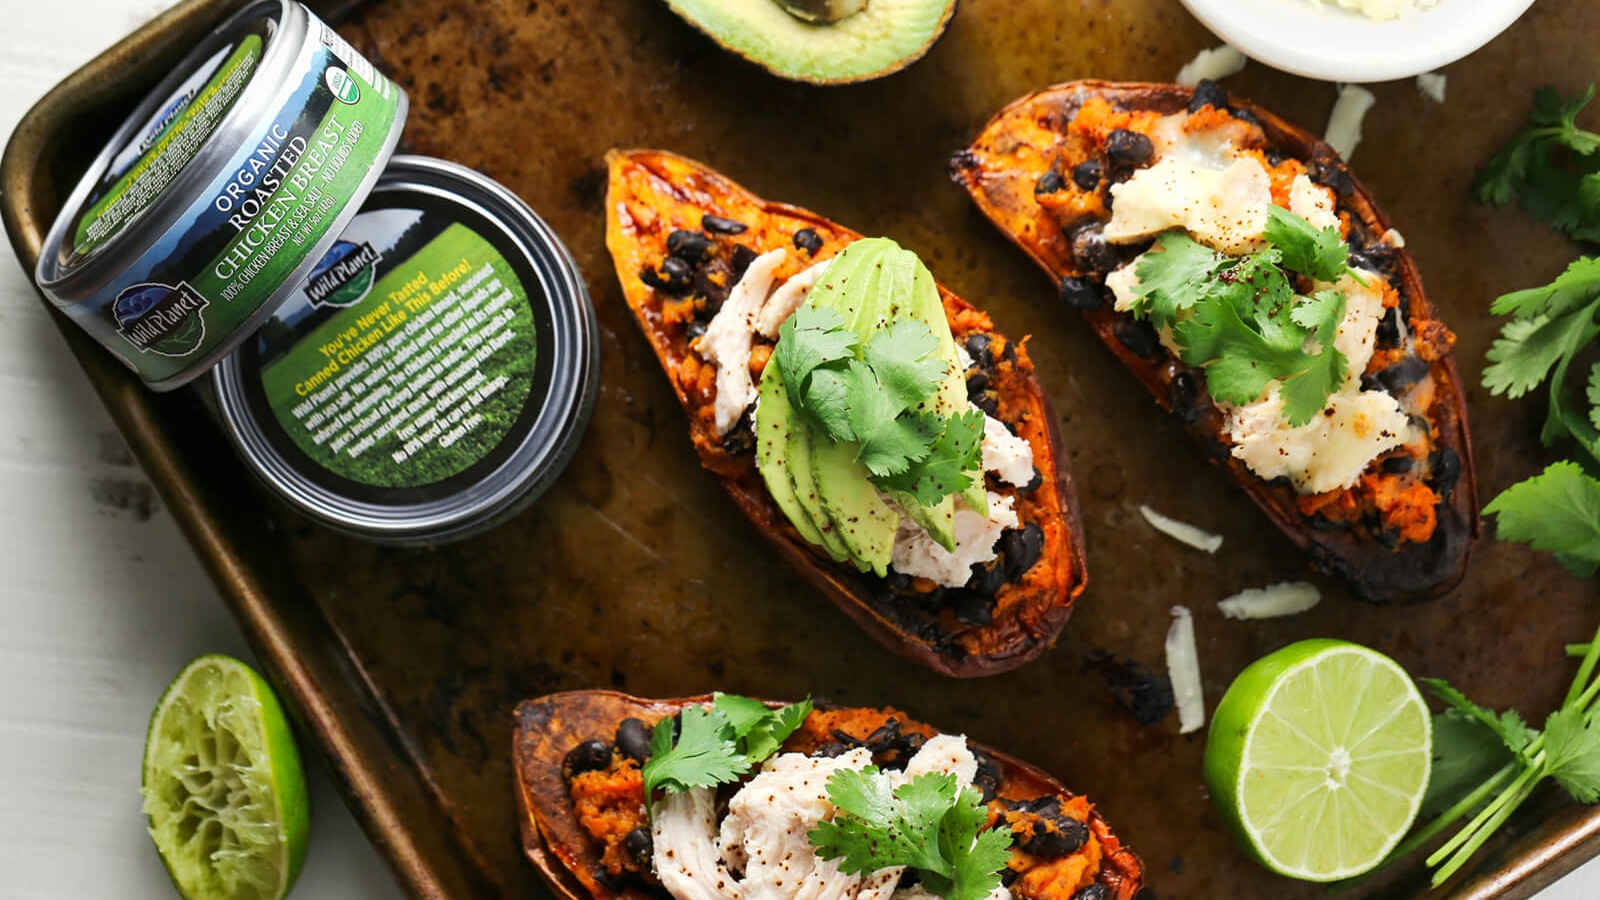 Image of Chicken and Black Bean Stuffed Sweet Potatoes